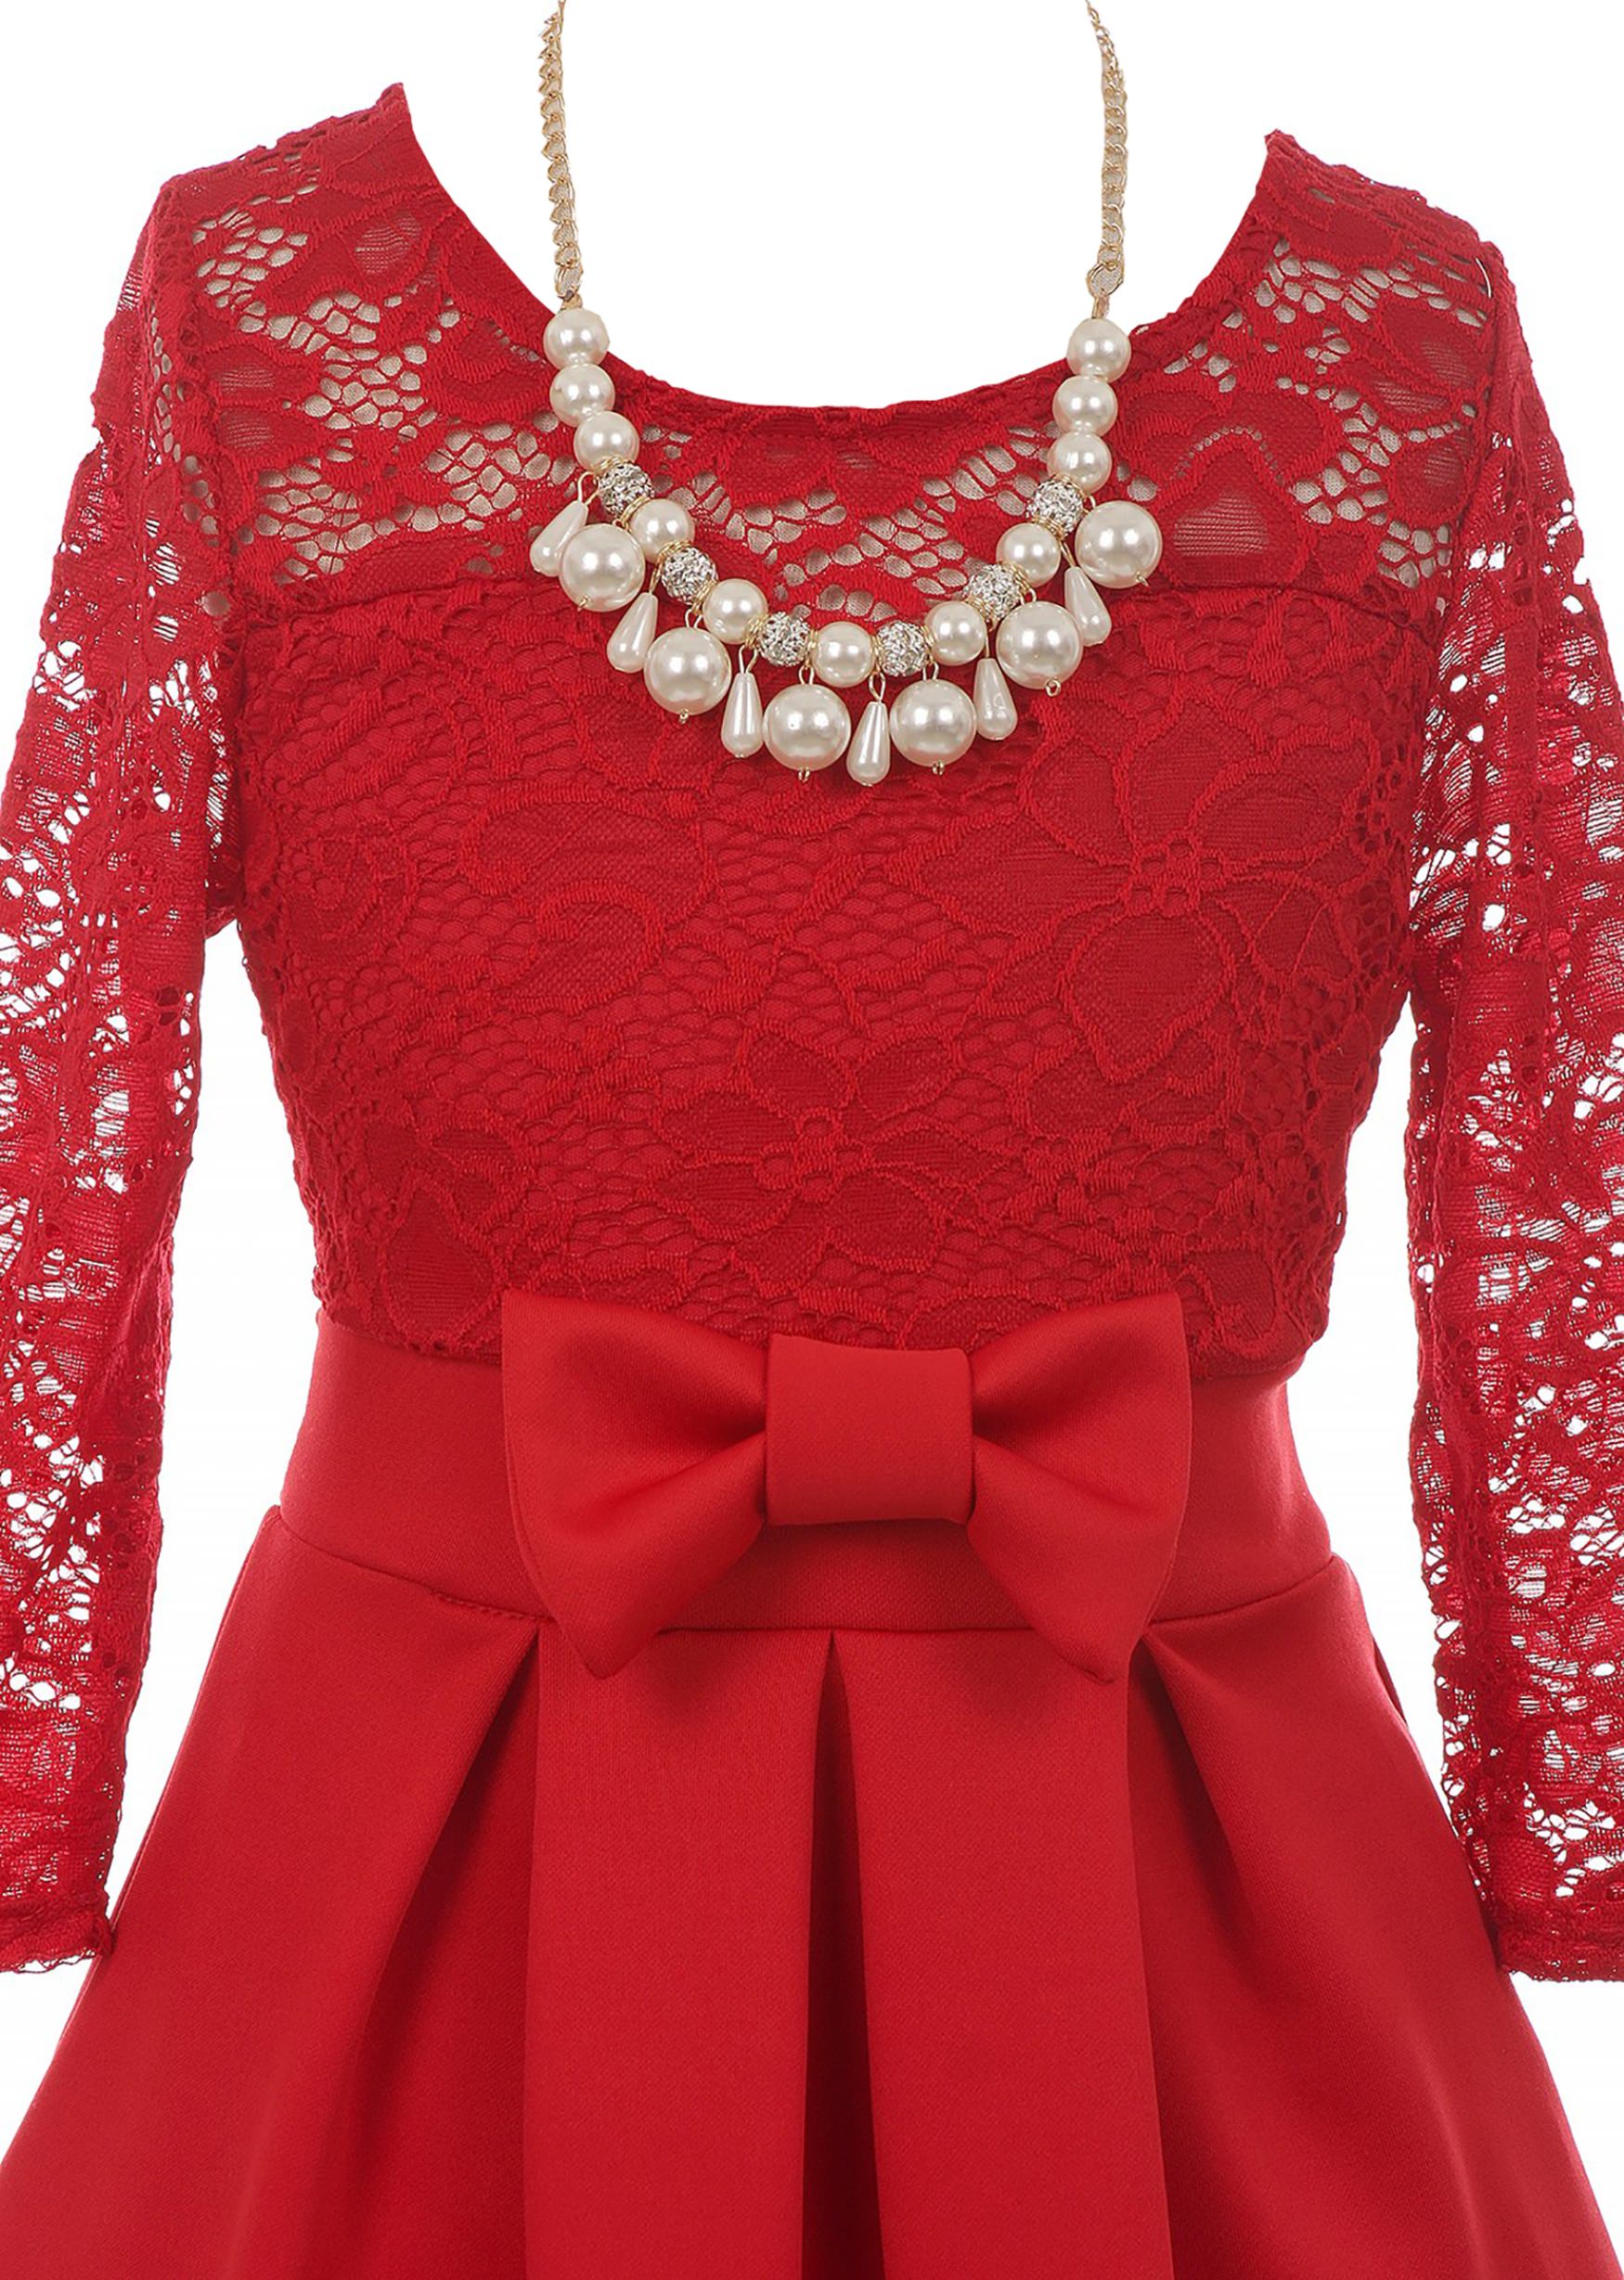 Little Girls Elegant Floral Lace Illusion Top Pearl Necklace Holiday Flower Girl Dress Red 4 (2J1K0S4) - image 2 of 4